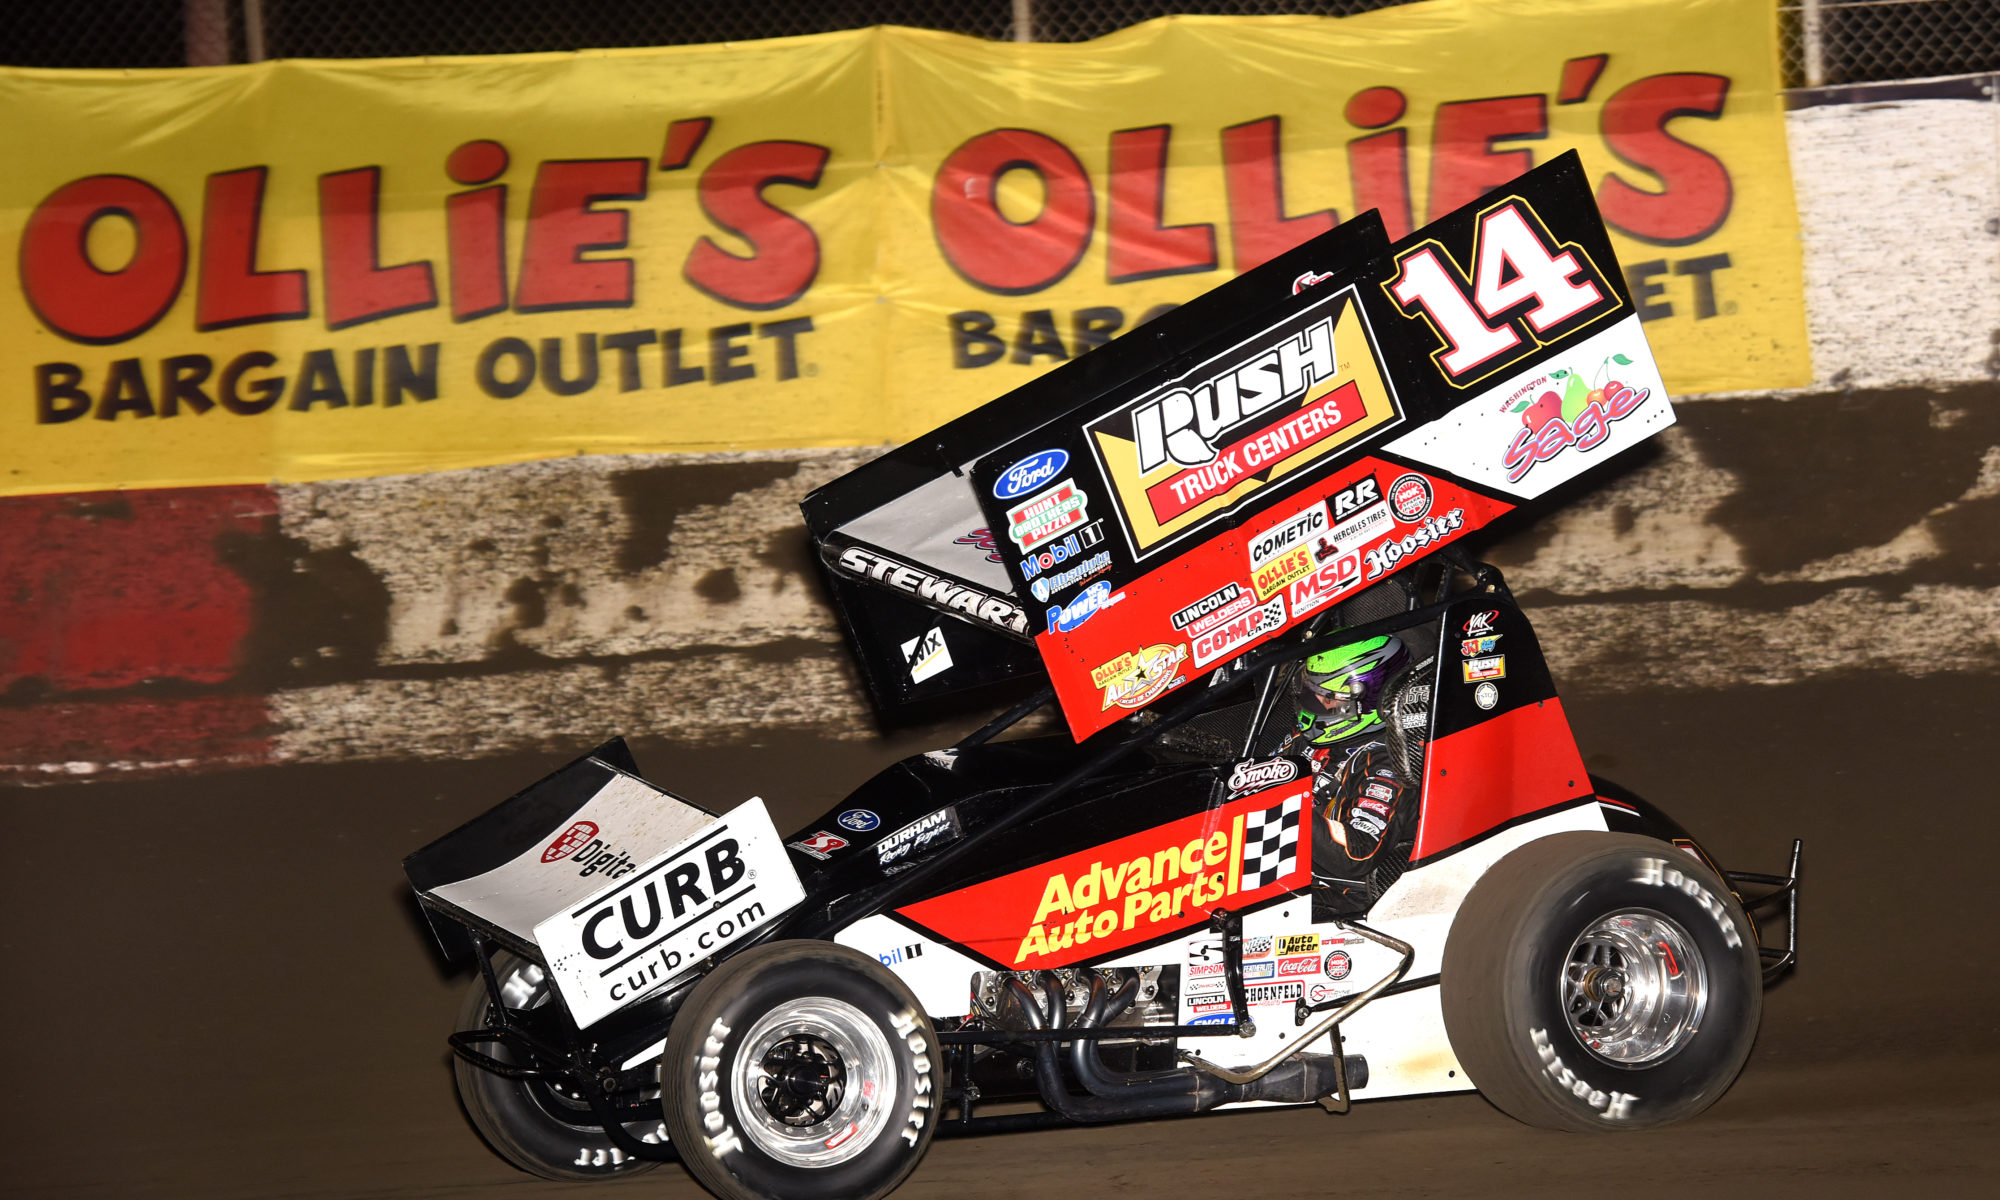 Tony Stewart will join All Stars during Park Jefferson visit on Friday and Saturday, May 29 and 30